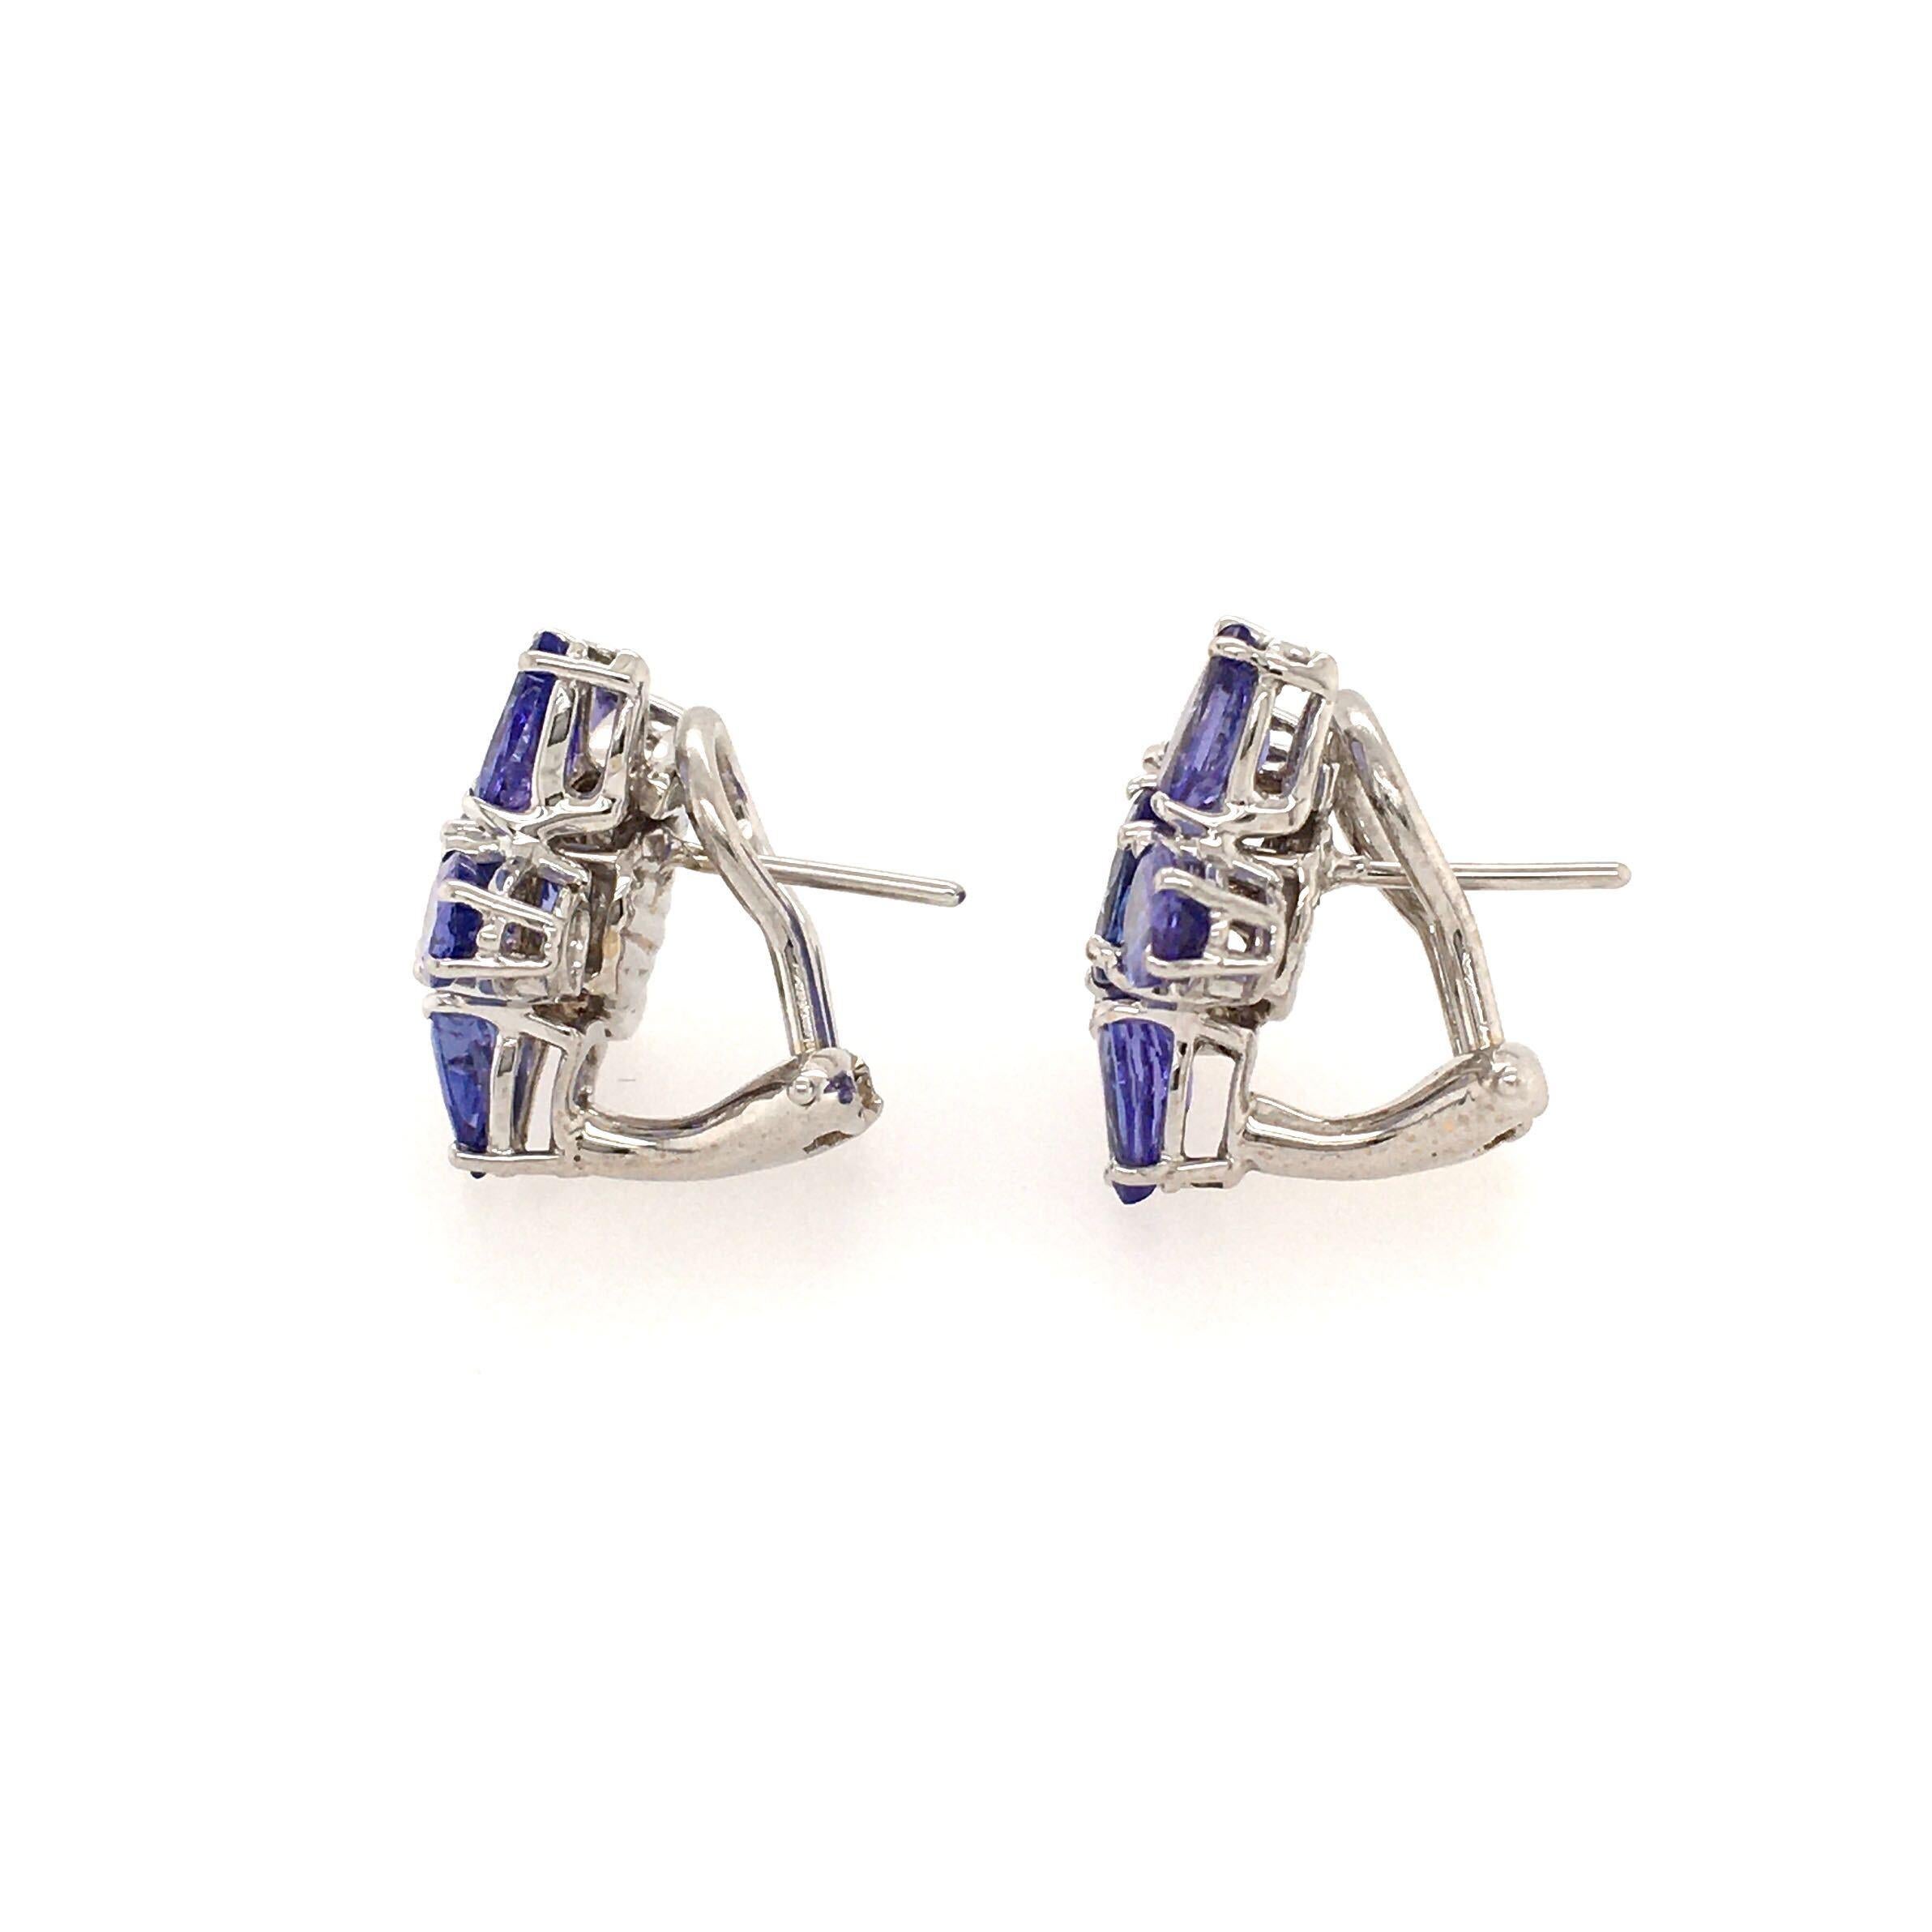 A pair of 18 karat white gold and tanzanite earrings. Mish. Designed as a flower head, centering a circular cut tanzanite, measuring approximately 6.0mm,  extending pear shaped tanzanite petals, measuring approximately 6.0 x 4.0mm. Diameter is